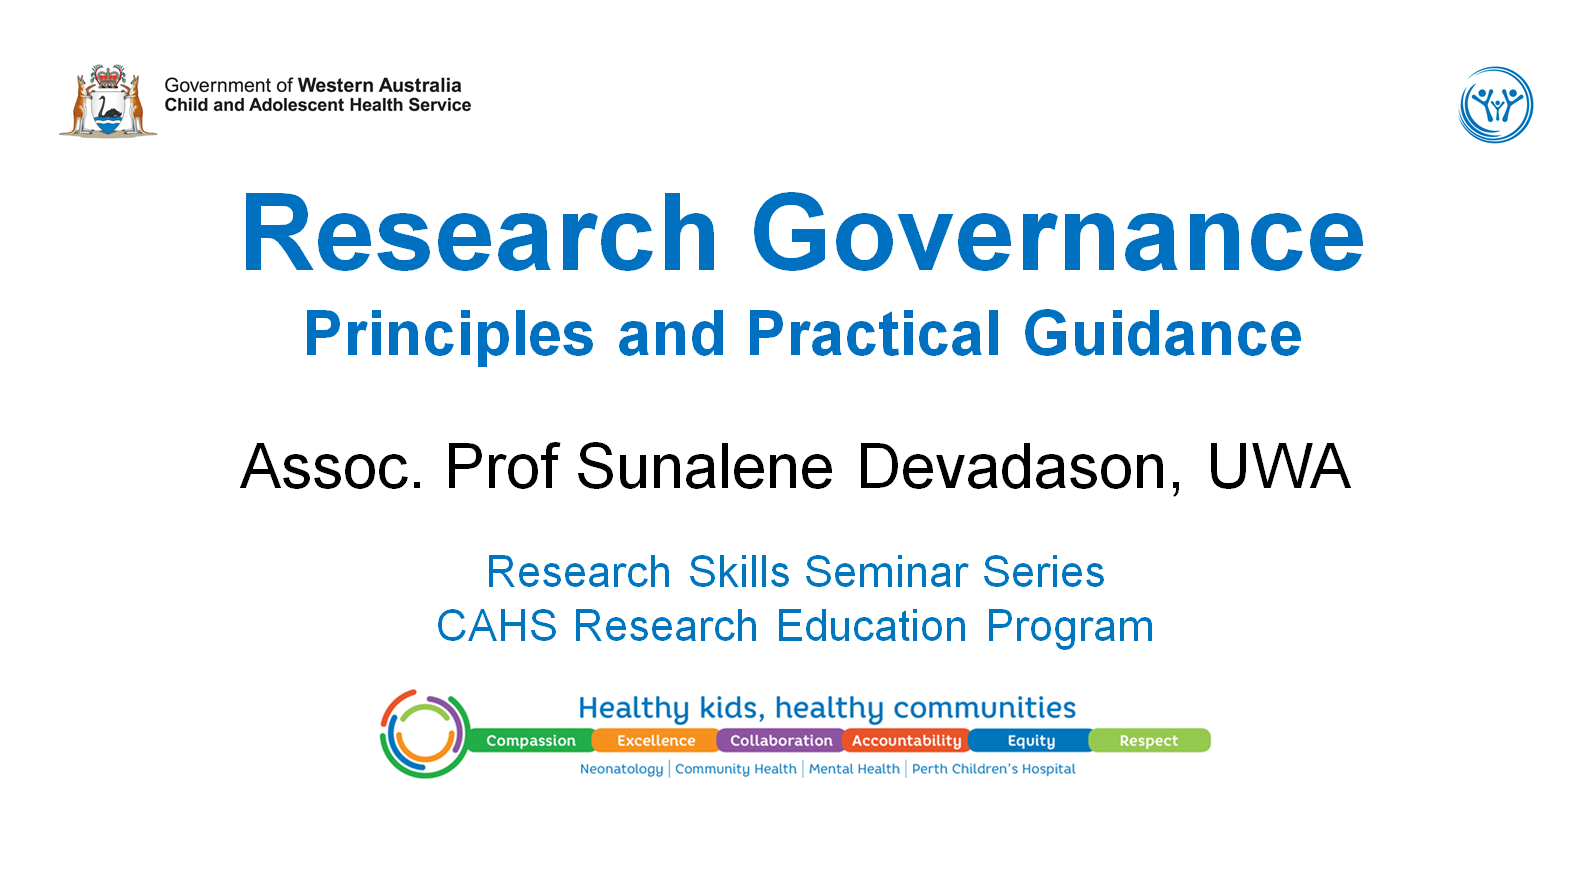 Research Skills Seminar: Research Governance - 21 February